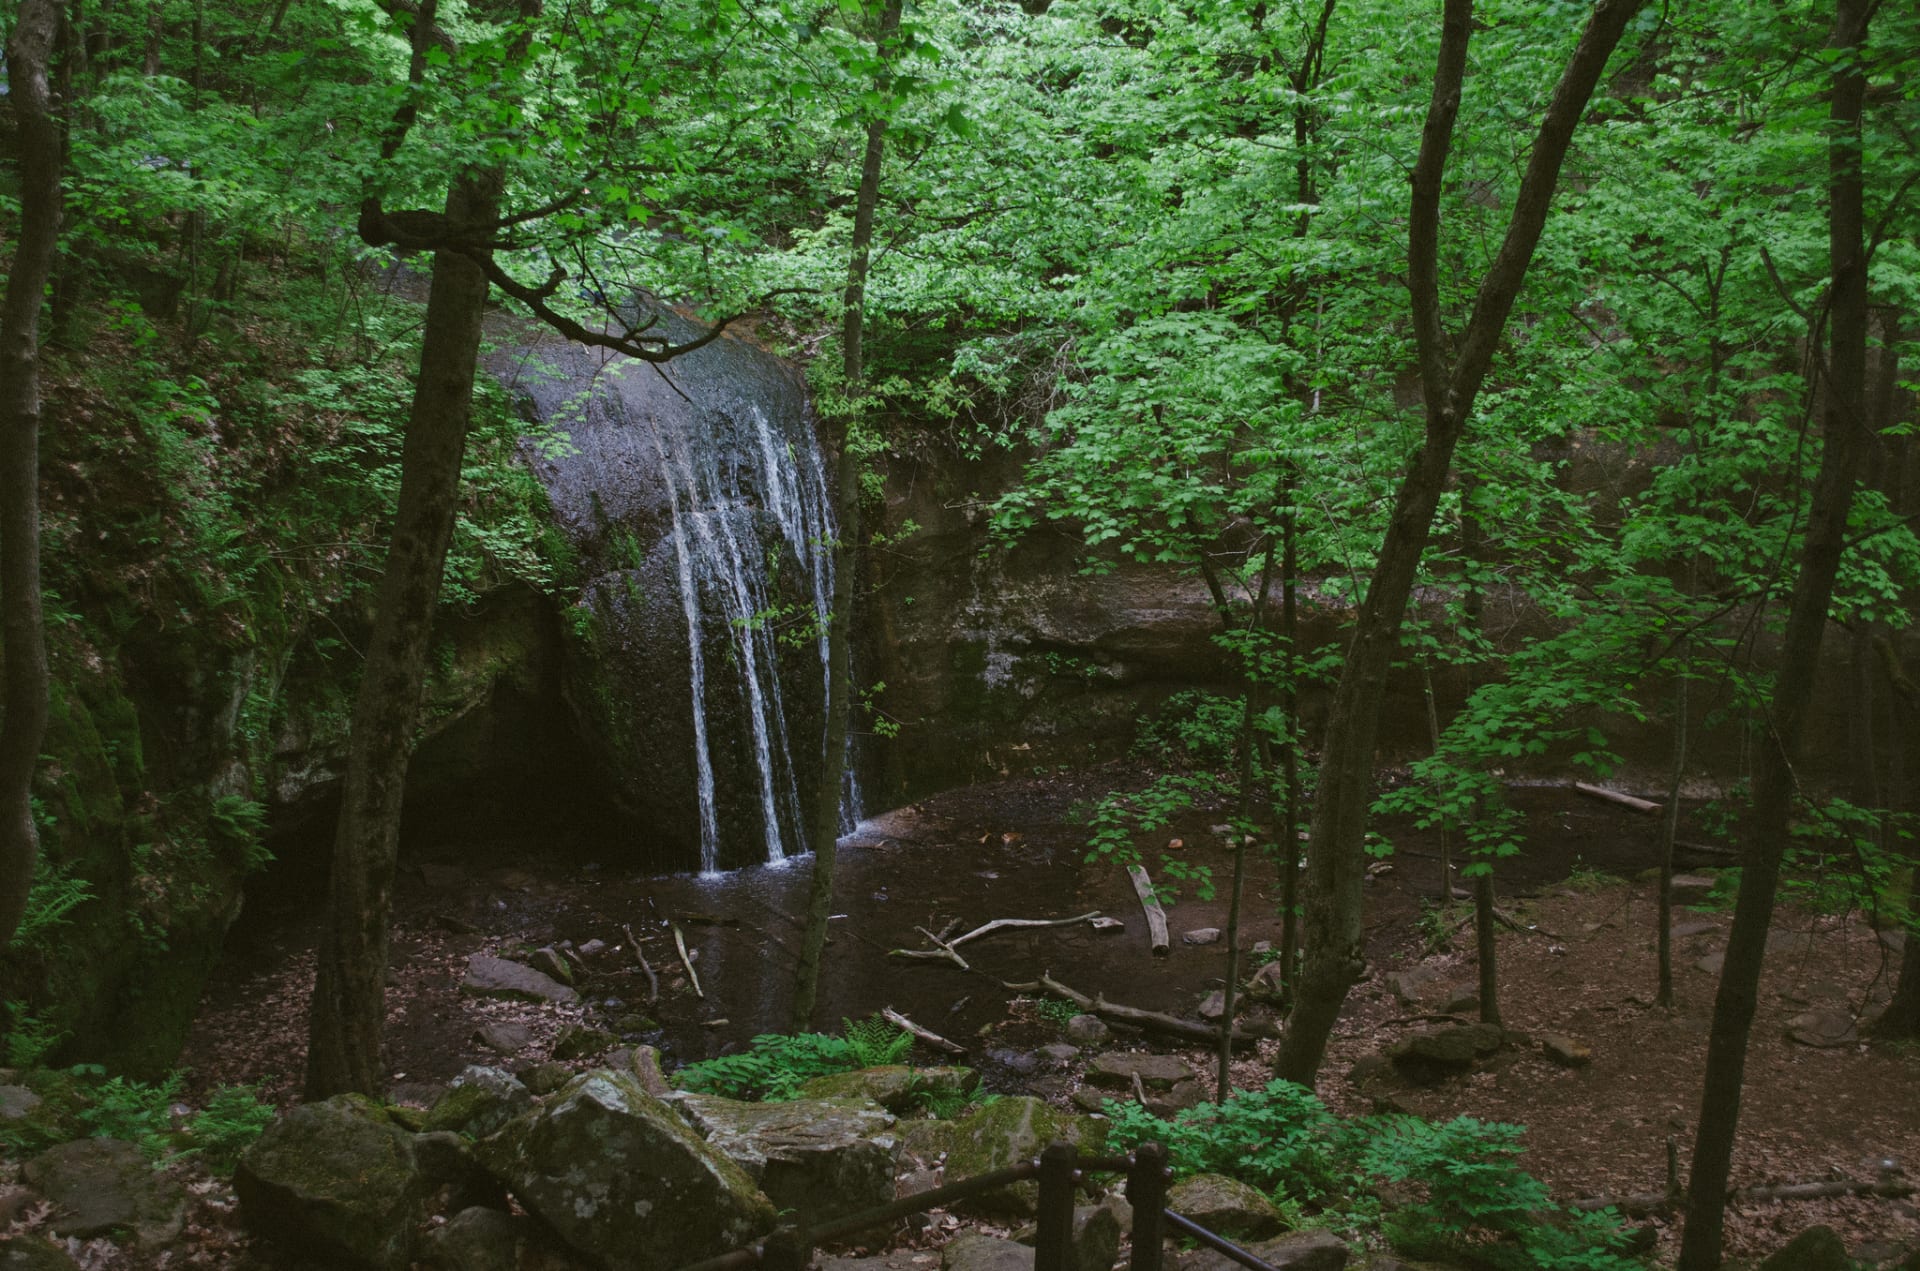 My favorite trail at Governor Dodge is the Lost Canyon Trail that starts with the decent to the gorgeous Stephen's Falls. My favorite time of year to go is around Mid-May when the leaves are G R E E N and the bugs are minimal.